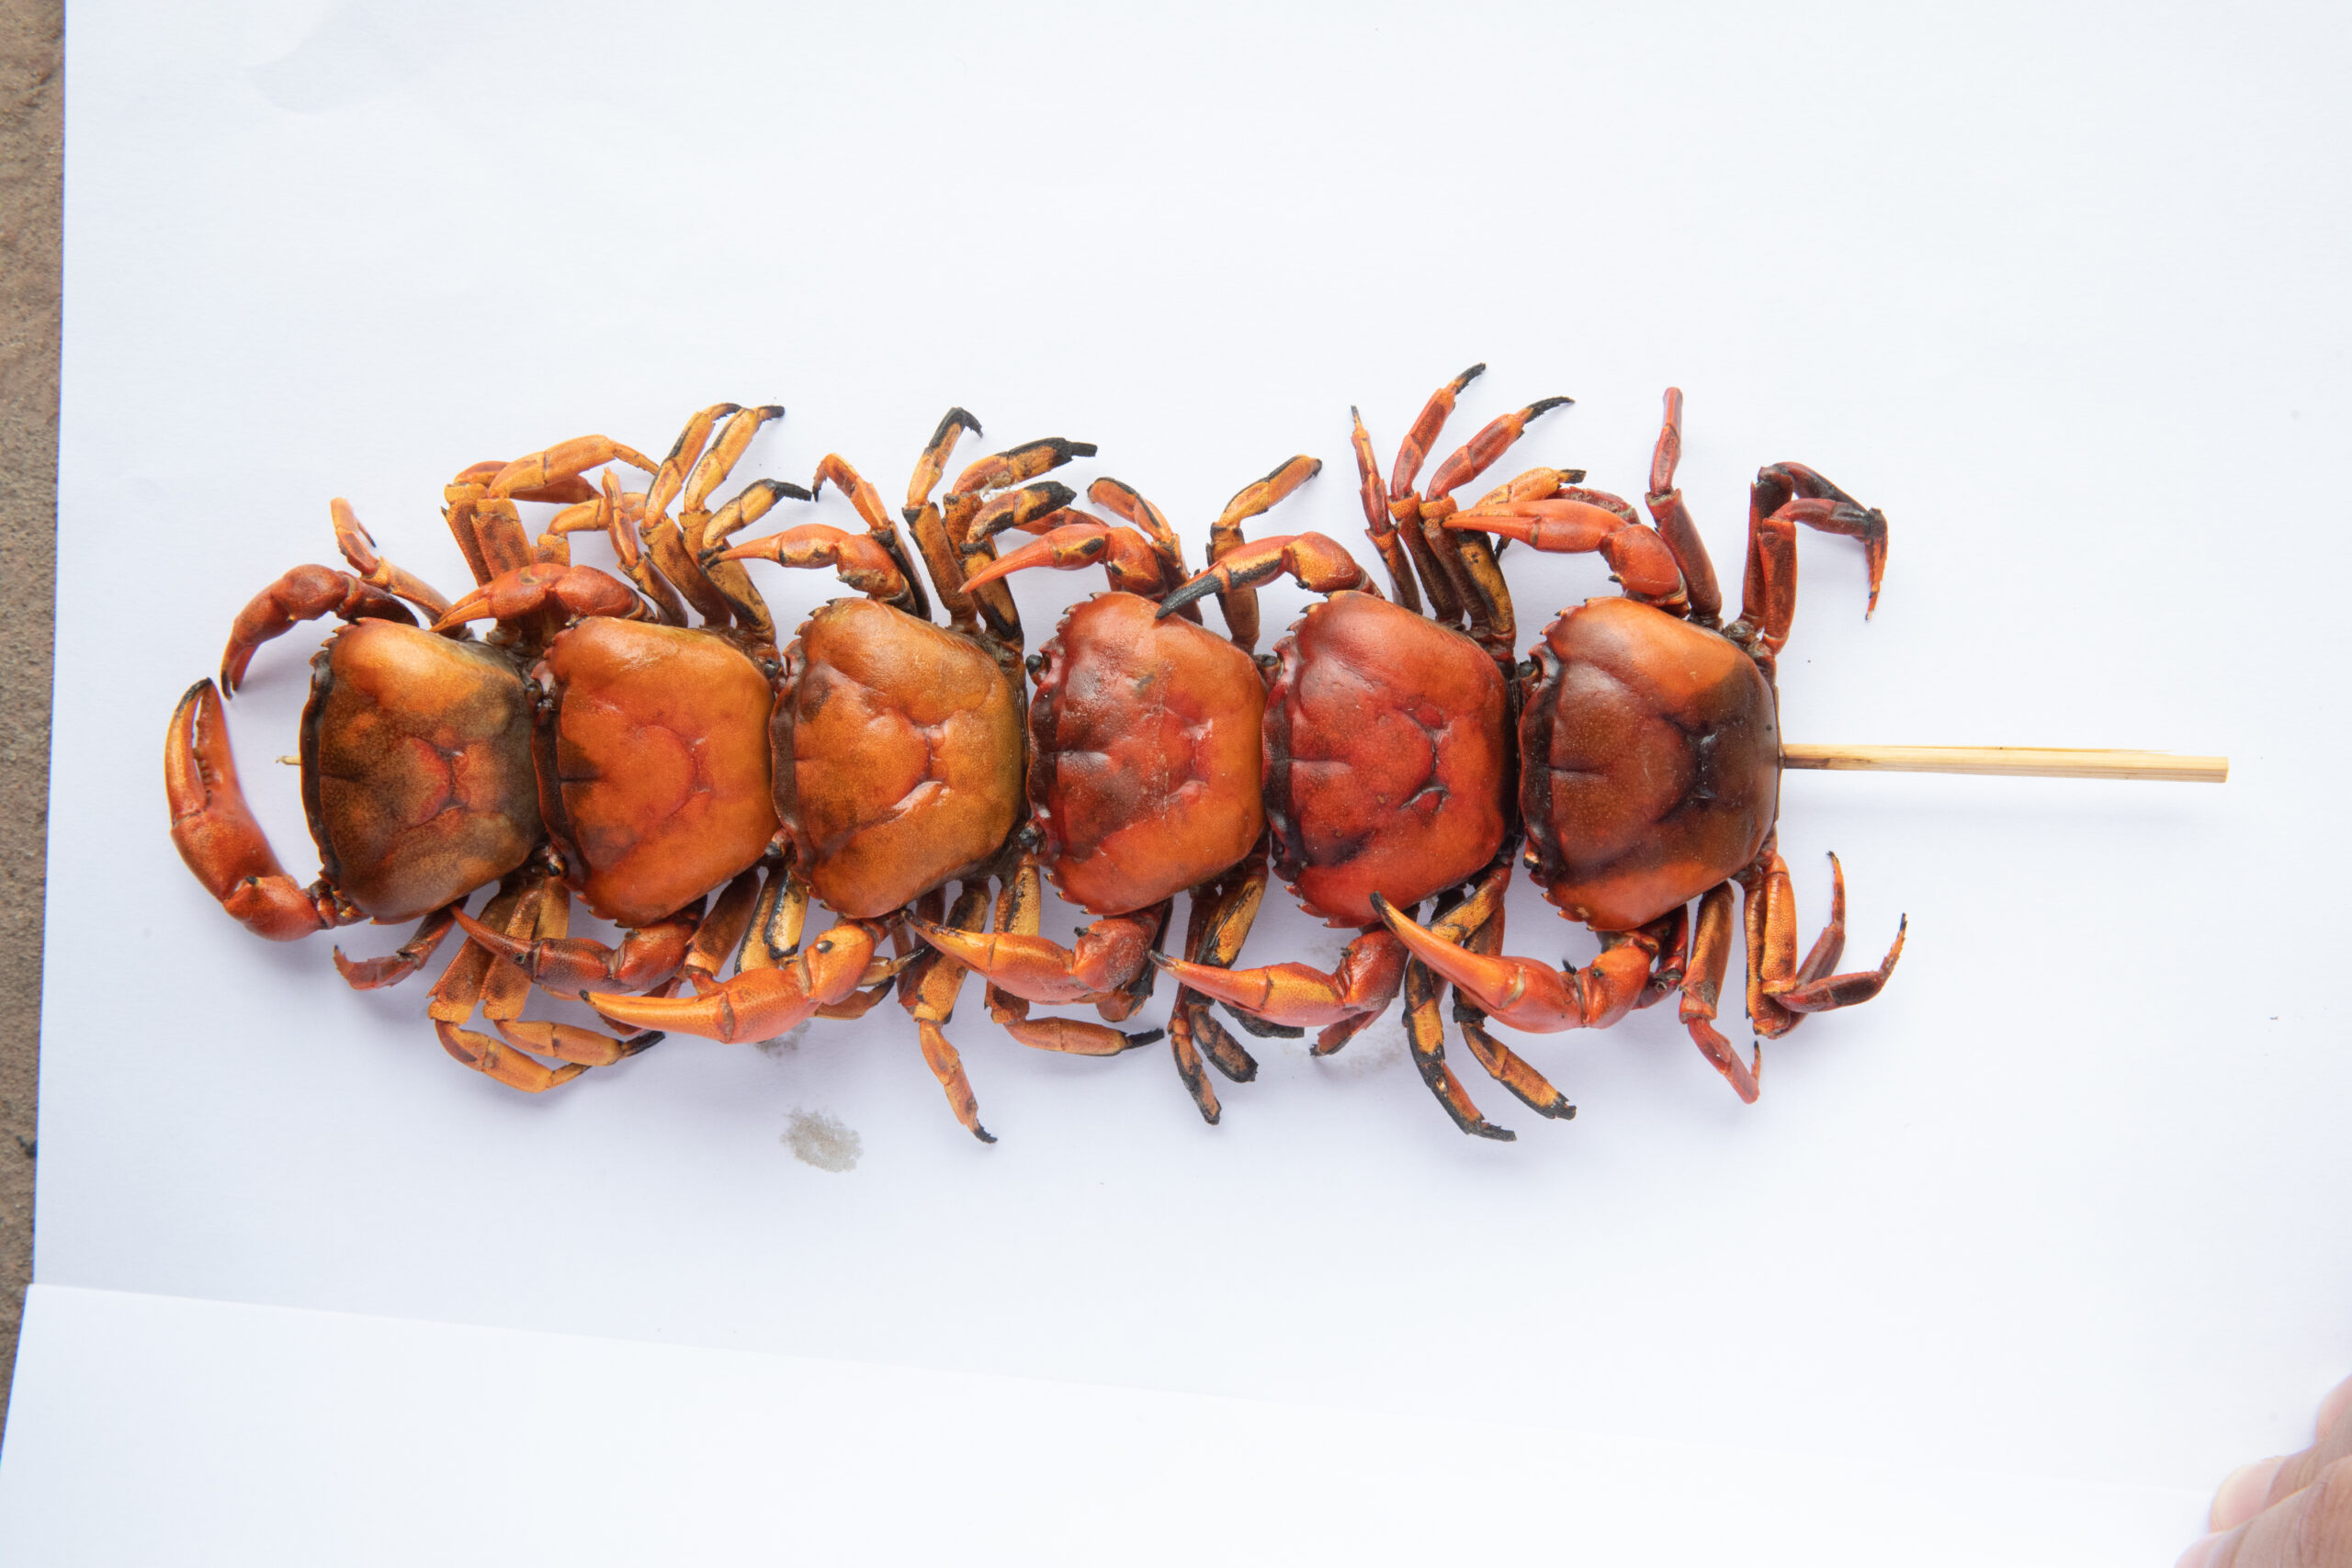 Six small red-shelled crabs stacked on a wooden skewer.